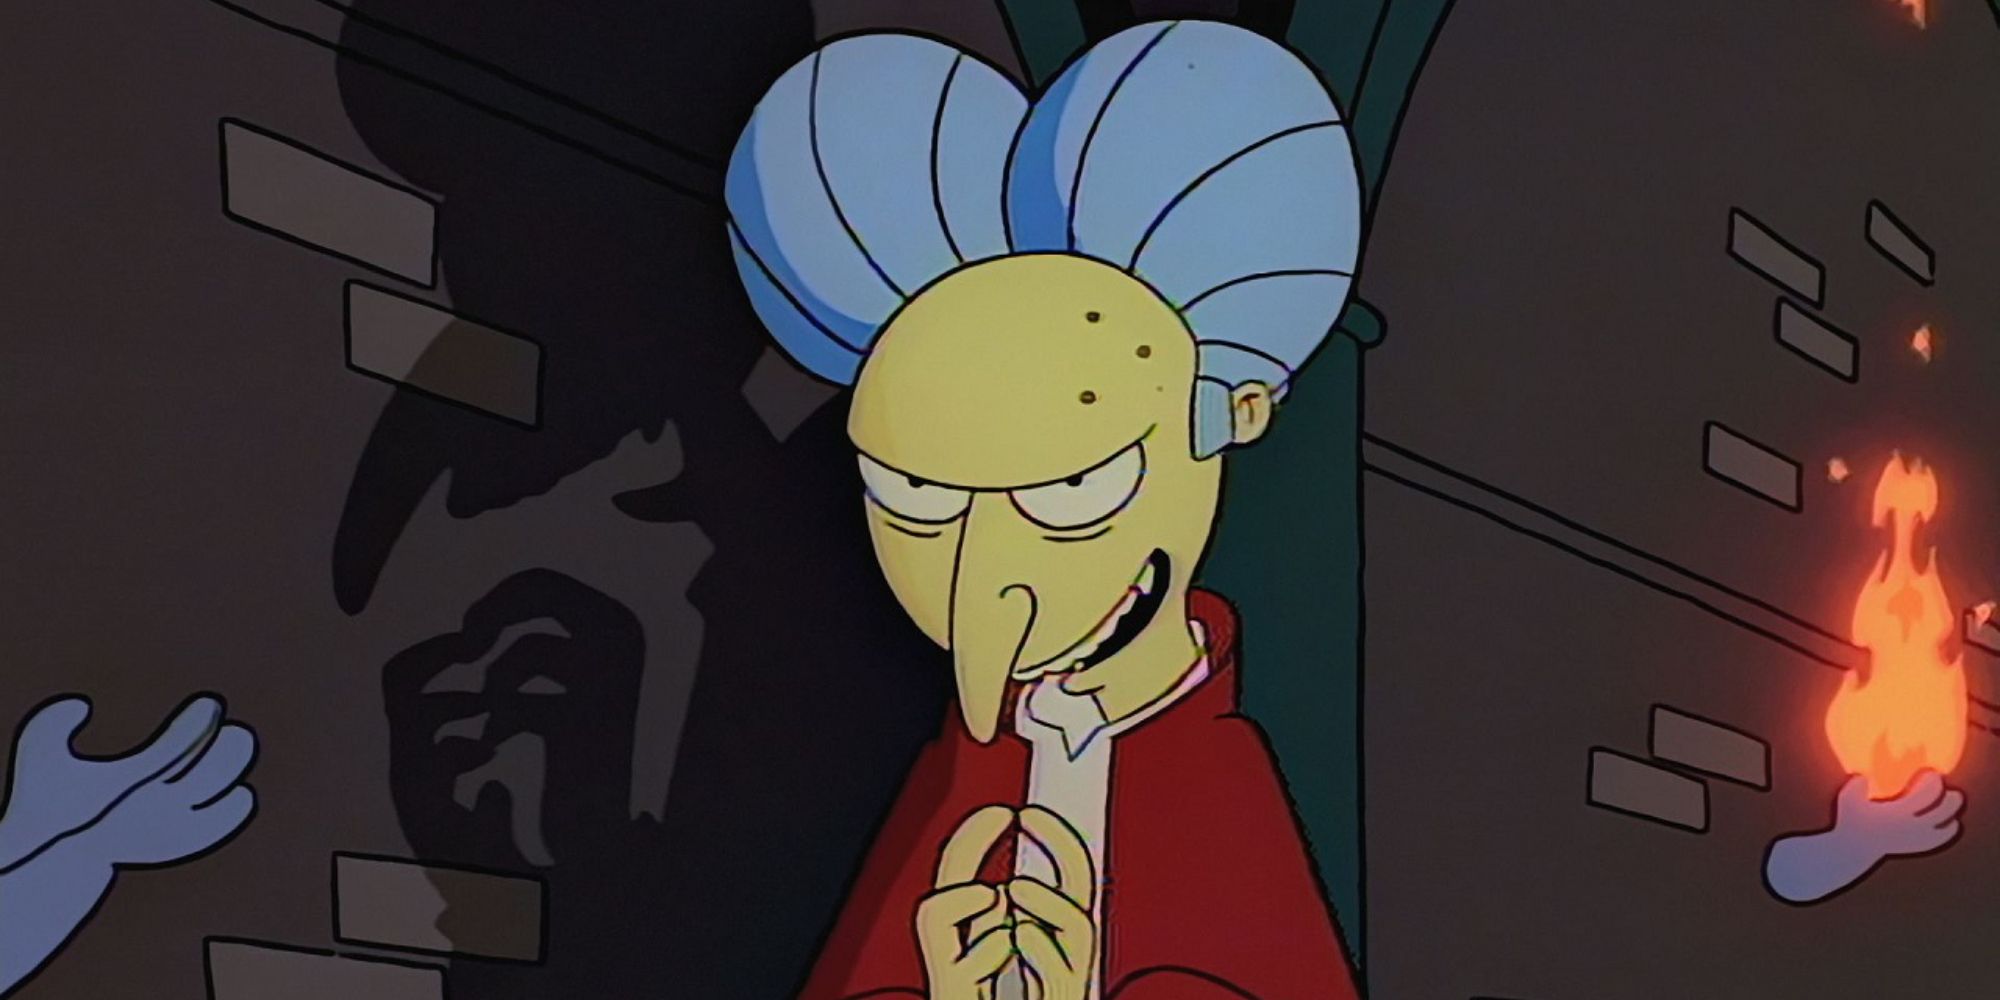 Mr. Burns in the Treehouse of Horror IV episode of The Simpsons